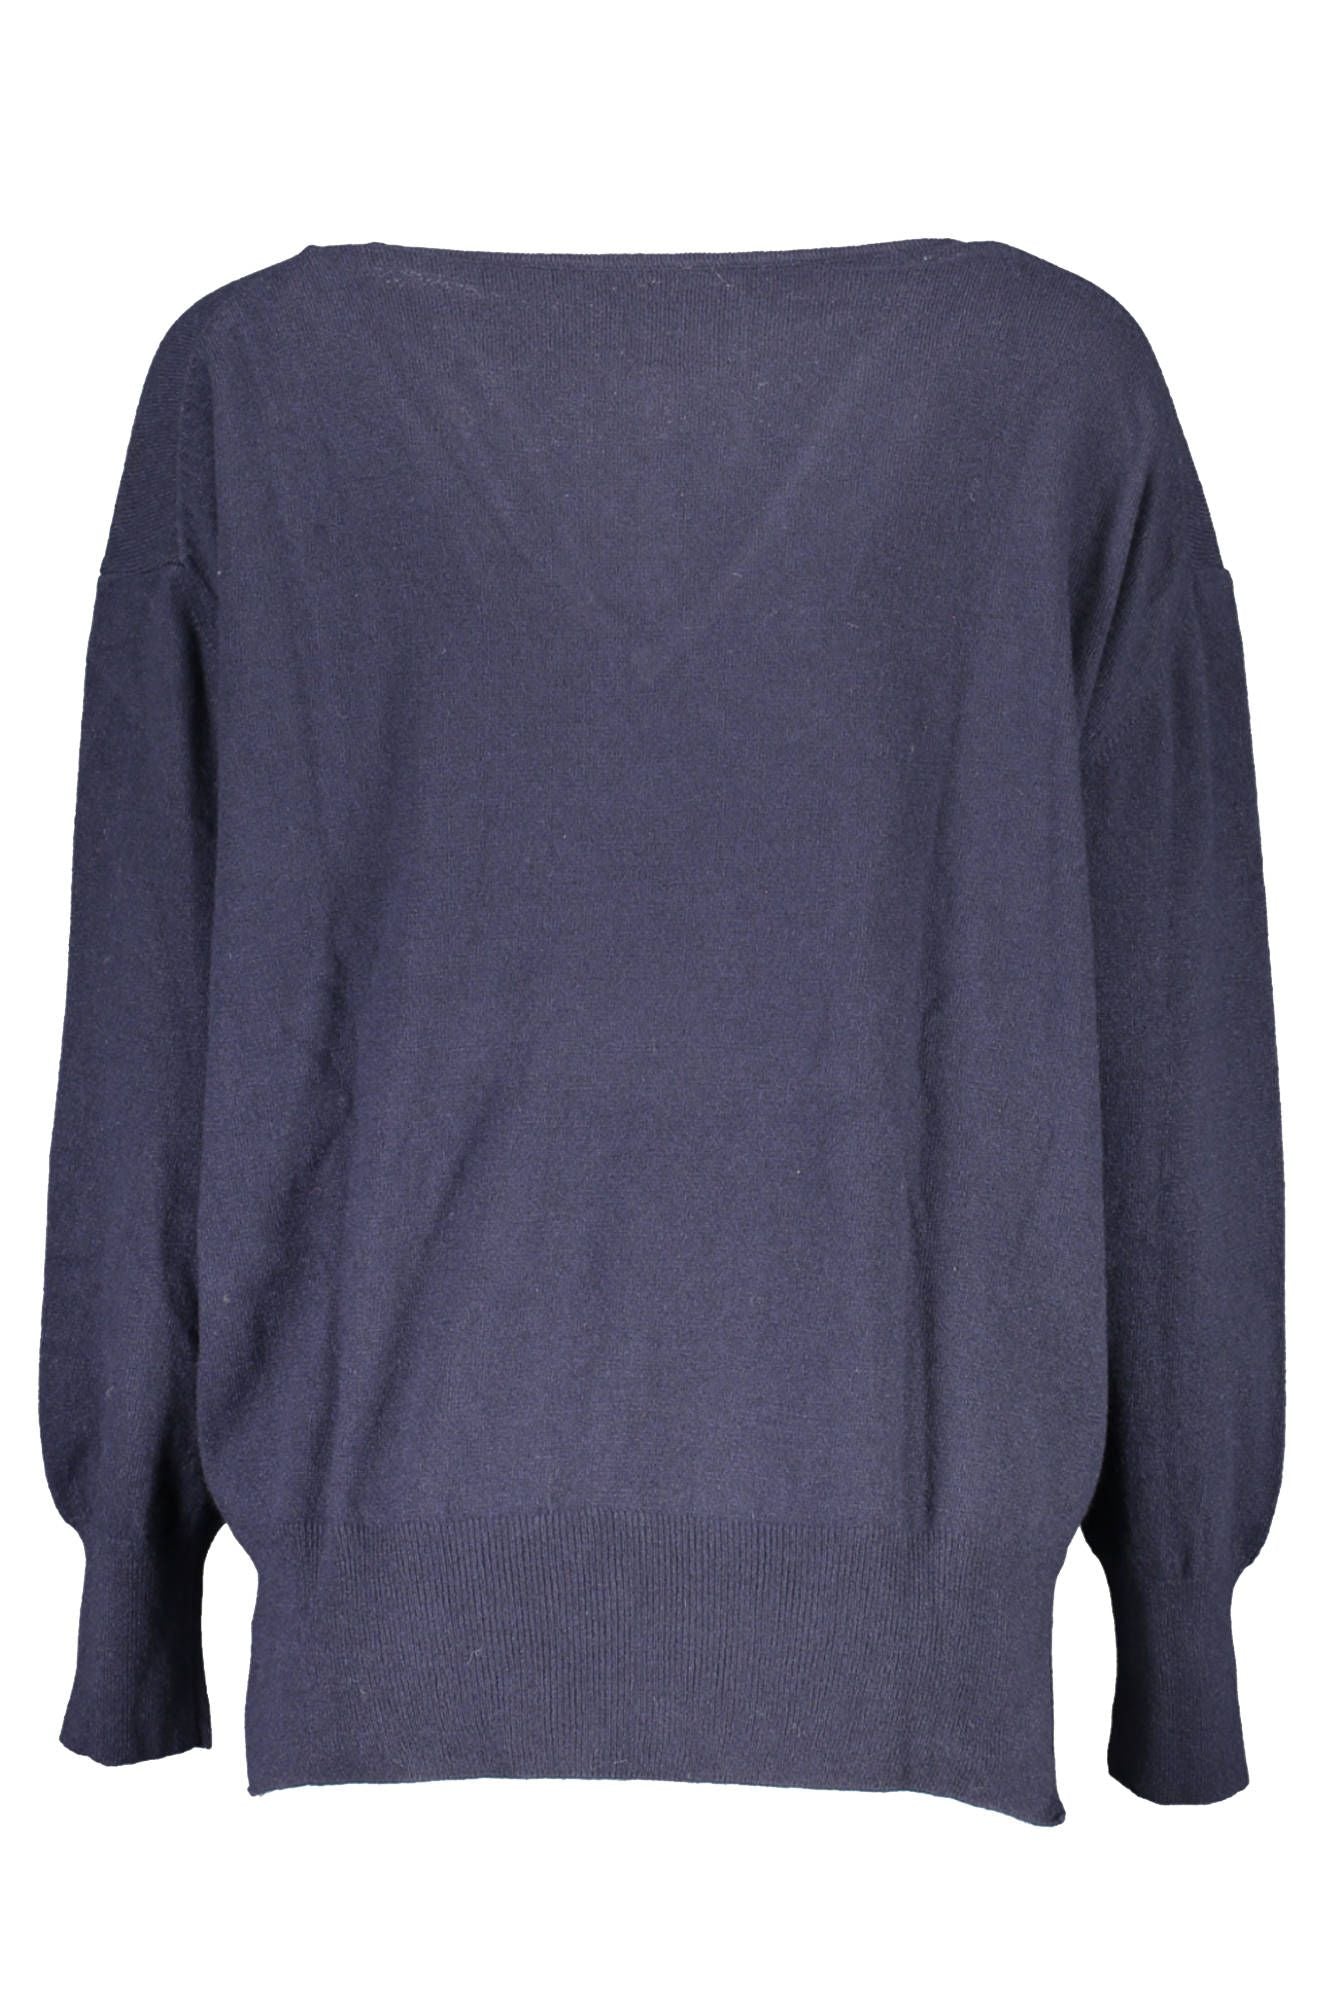 North Sails Eco-Conscious V-Neck Wool Blend Sweater